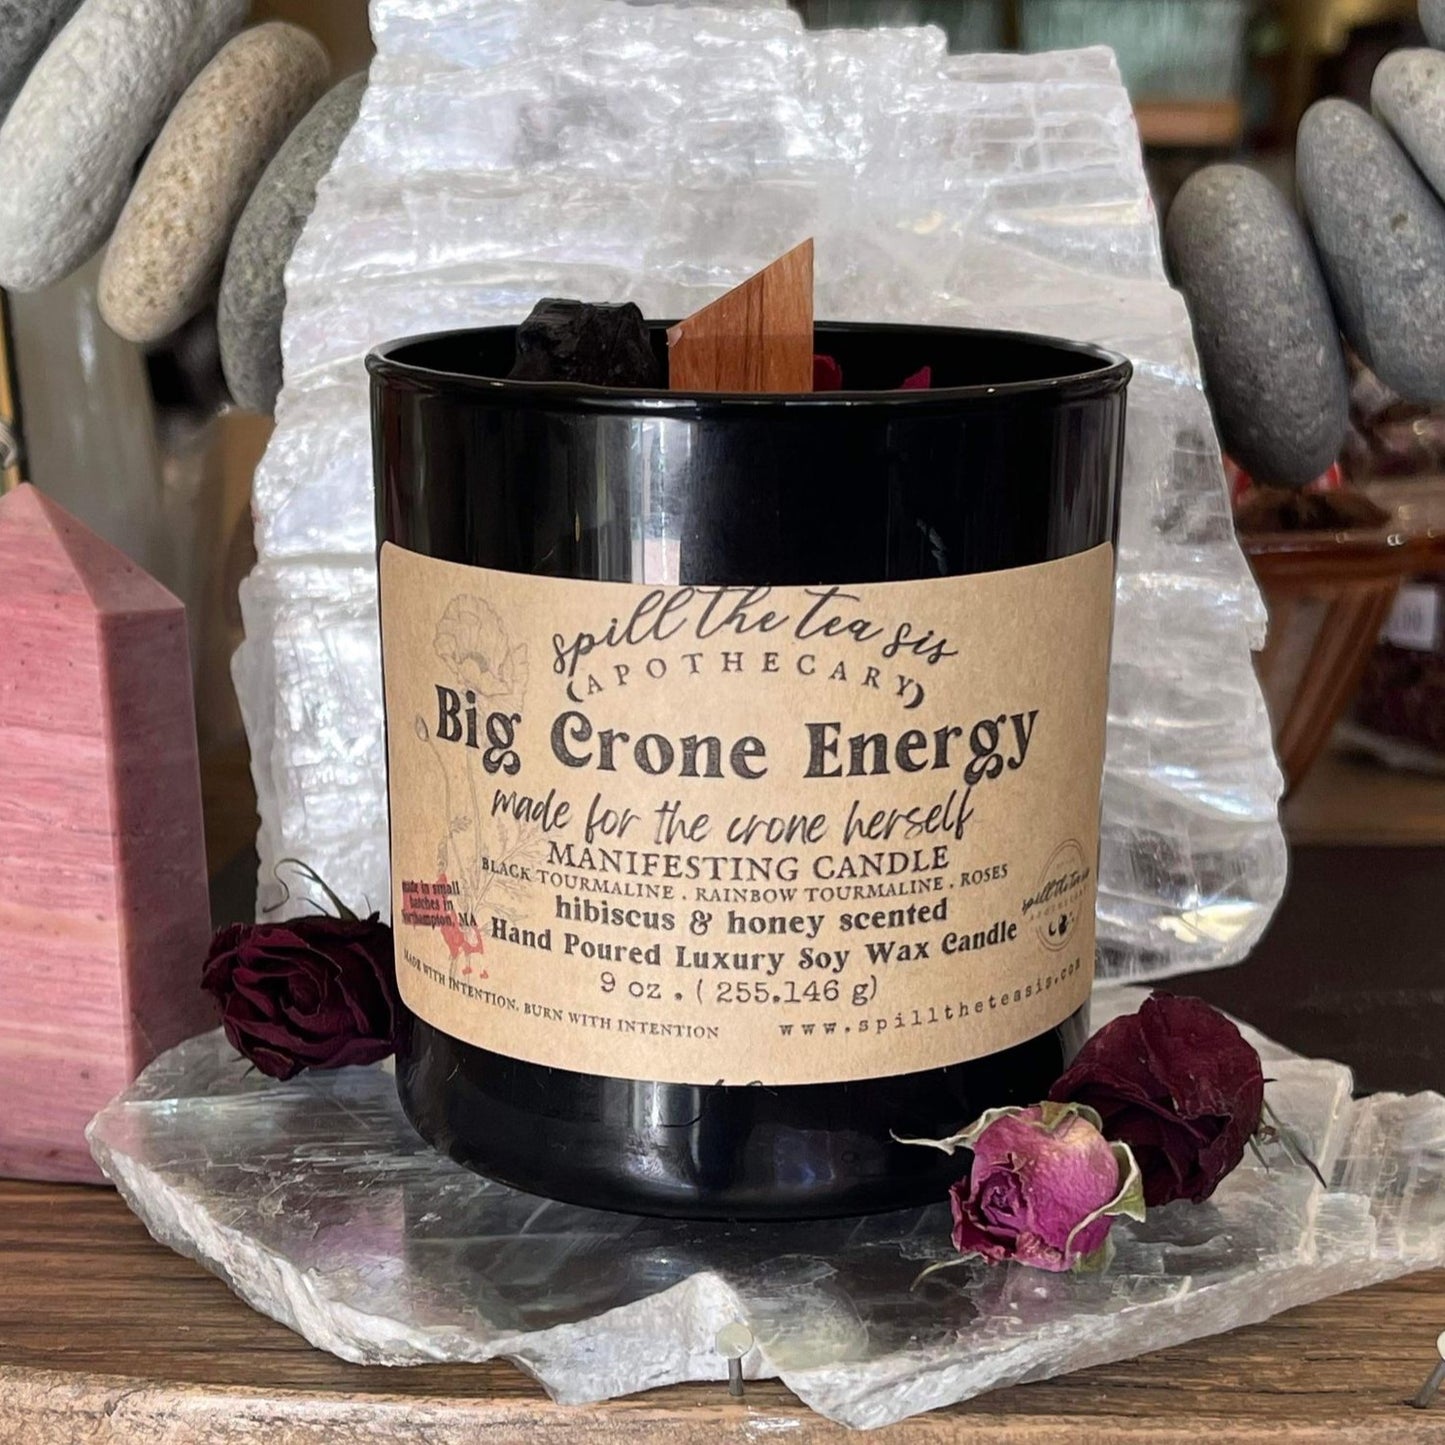 Big Crone Energy Soy Wax Intention Candle - 9oz